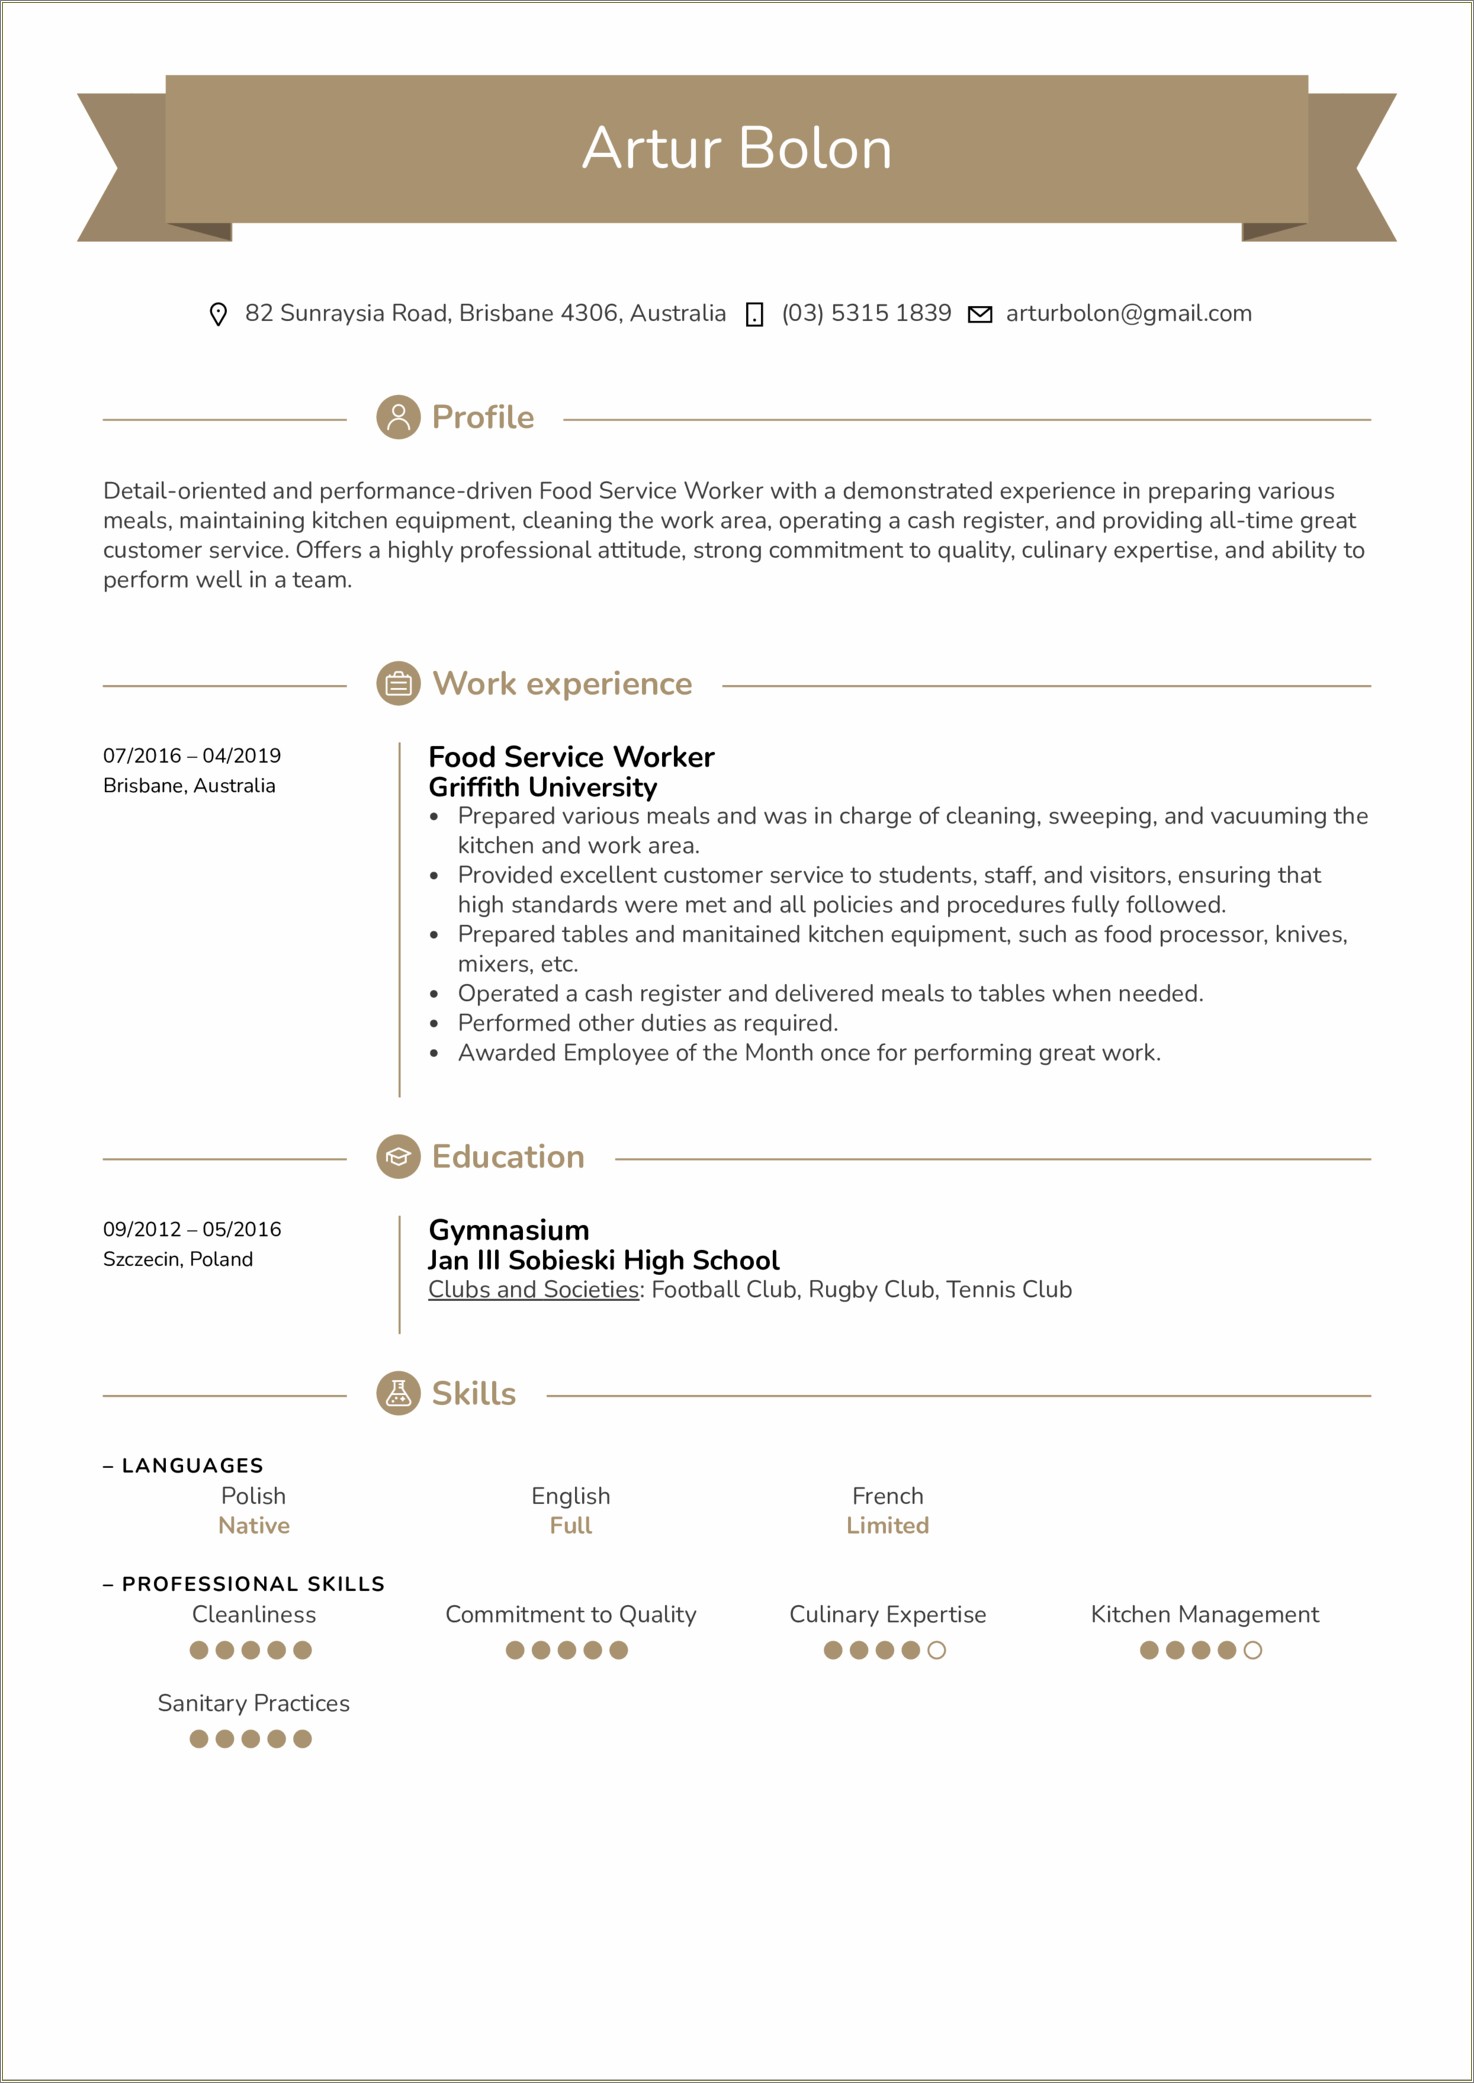 Sample Resume For School Cafeteria Manager